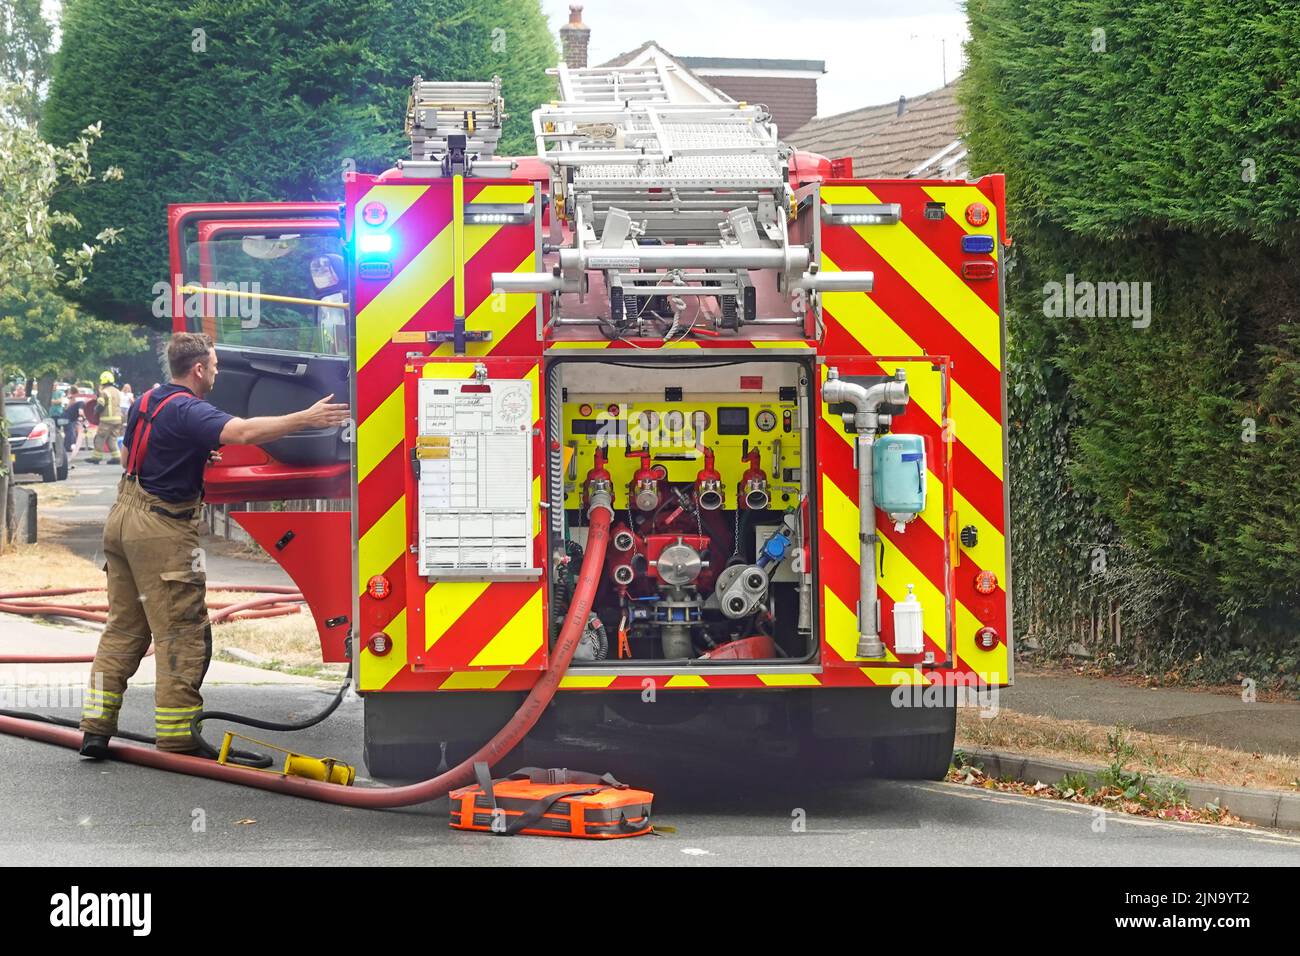 Essex Fire and Rescue Service at house building on fire close up back view fire brigade engine valves with hose connection & firefighter England UK Stock Photo